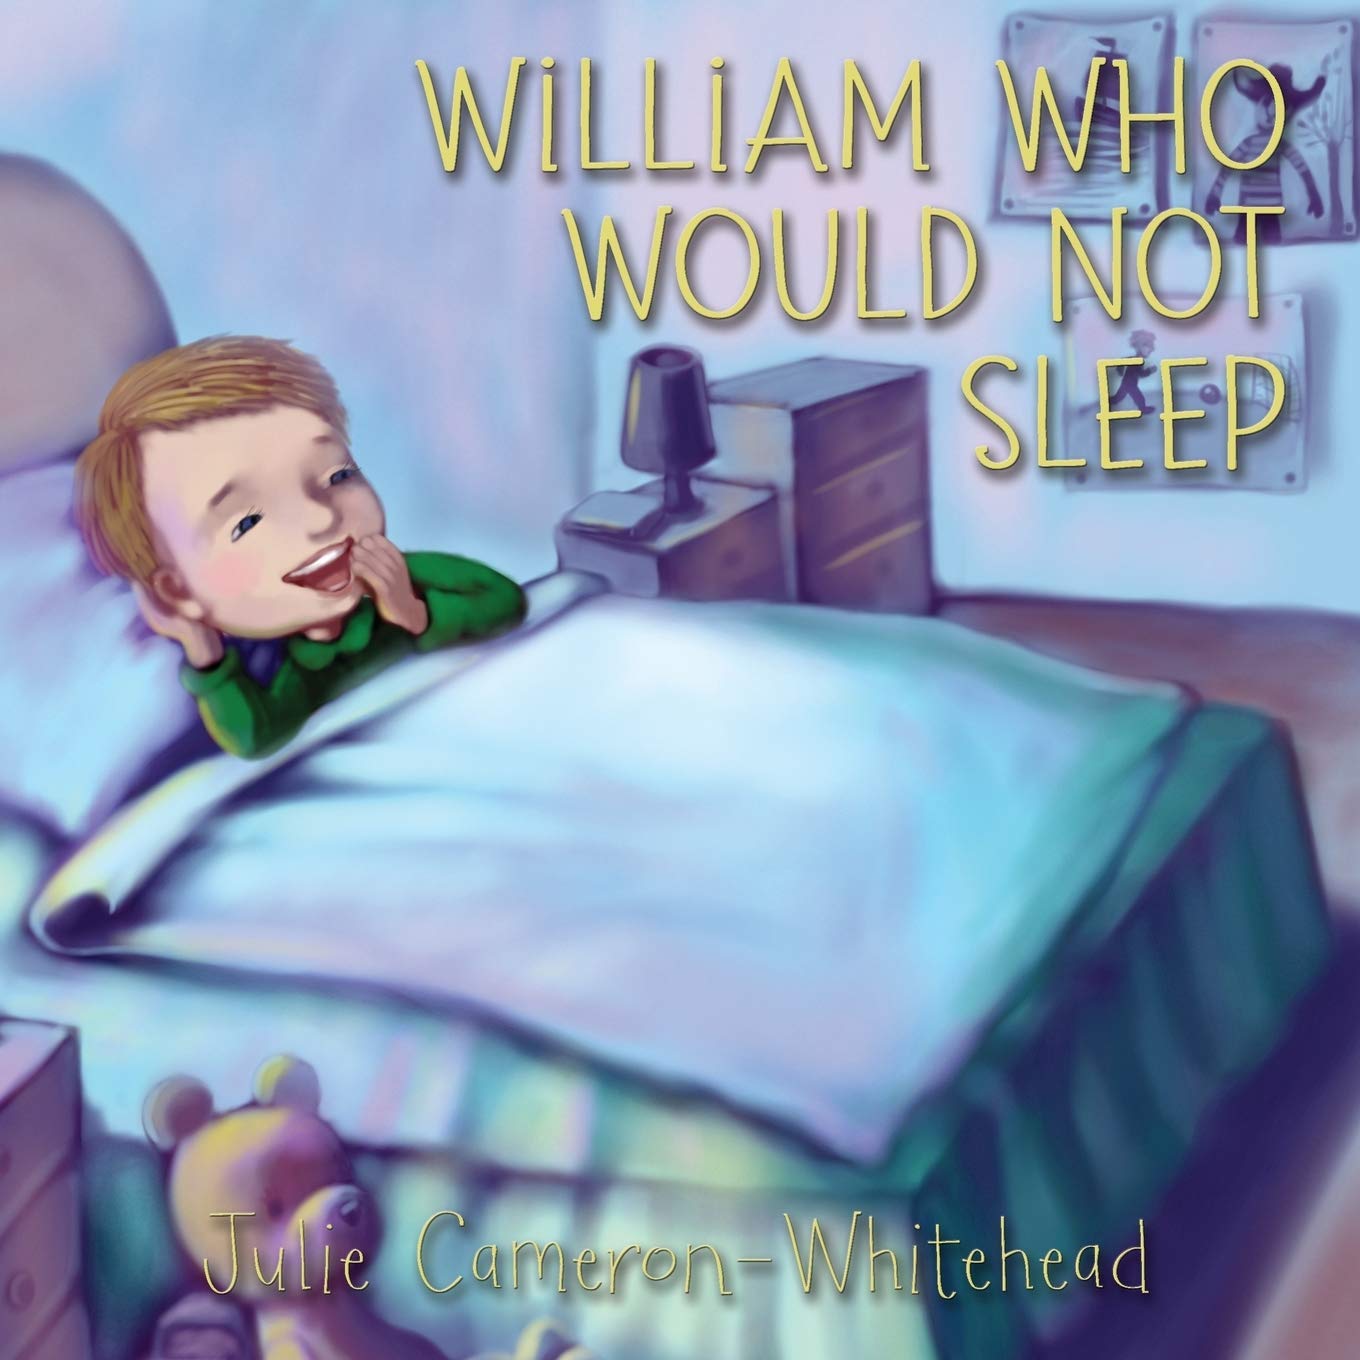 The back cover for the book William Who Would Not Sleep by Julie Cameron-Whitehead